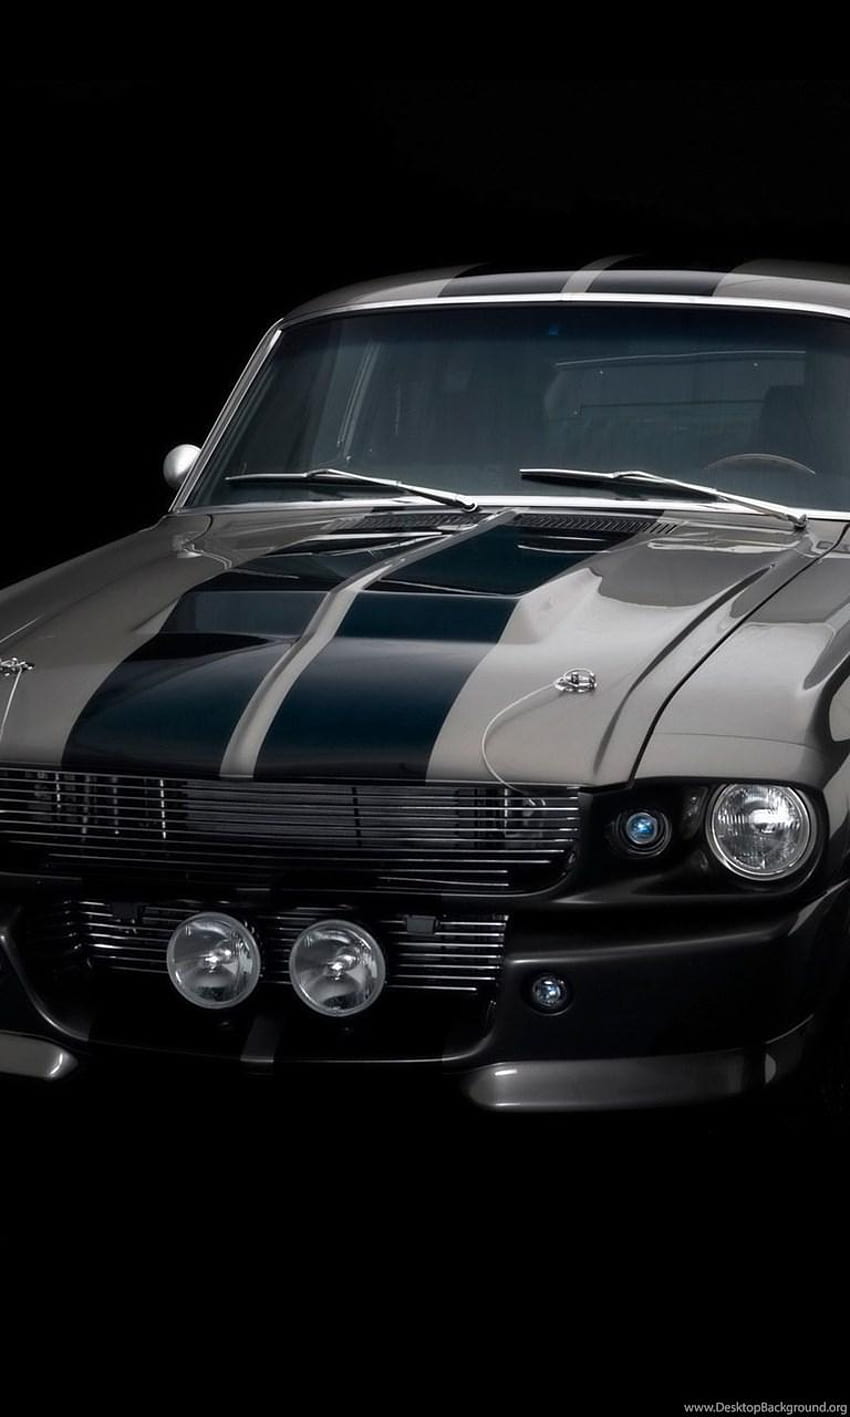 Mustang Shelby Gt500 Photos Download The BEST Free Mustang Shelby Gt500  Stock Photos  HD Images